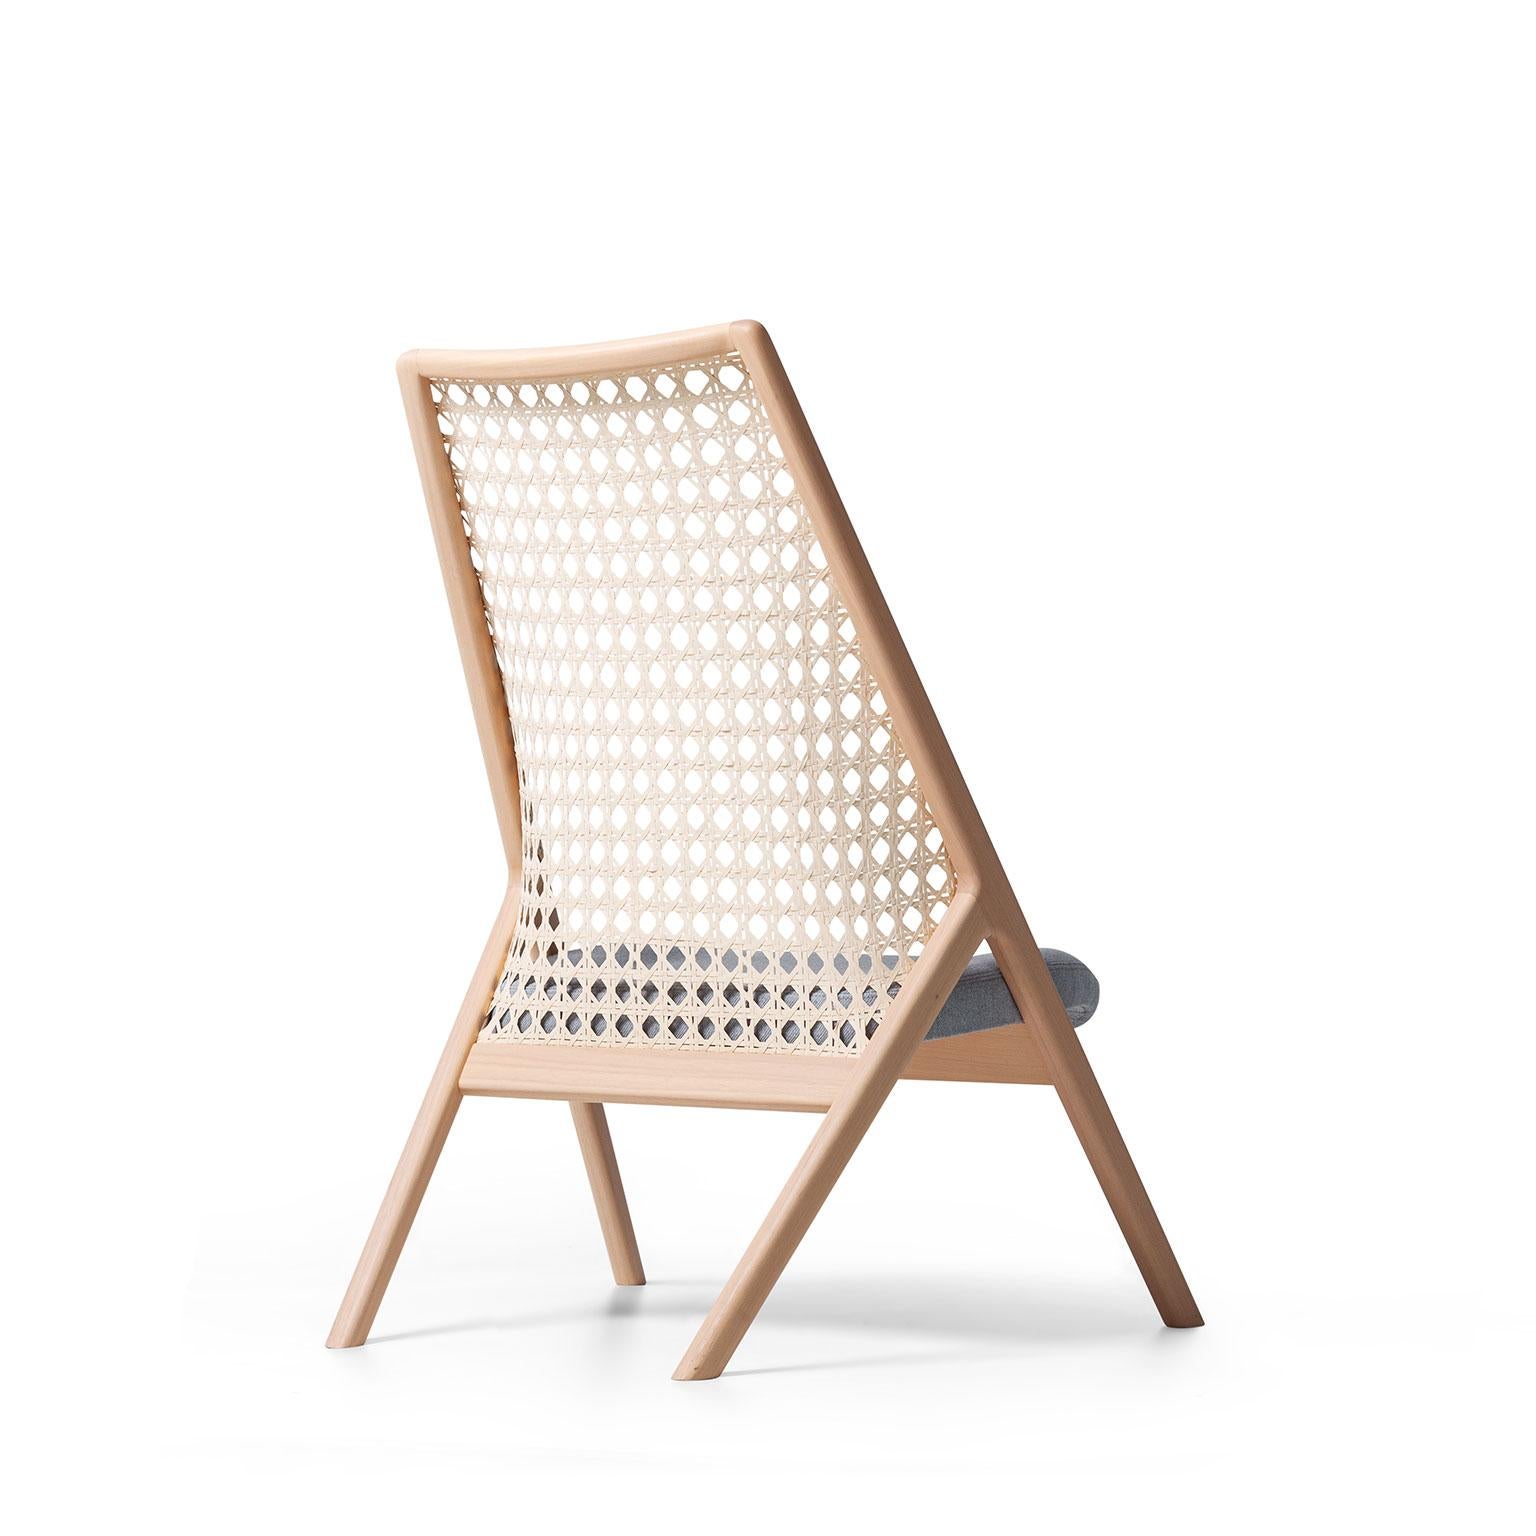 Upholstery Tela Lounge Chair in Recycled Cotton, by Wentz, Brazilian Contemporary Design For Sale